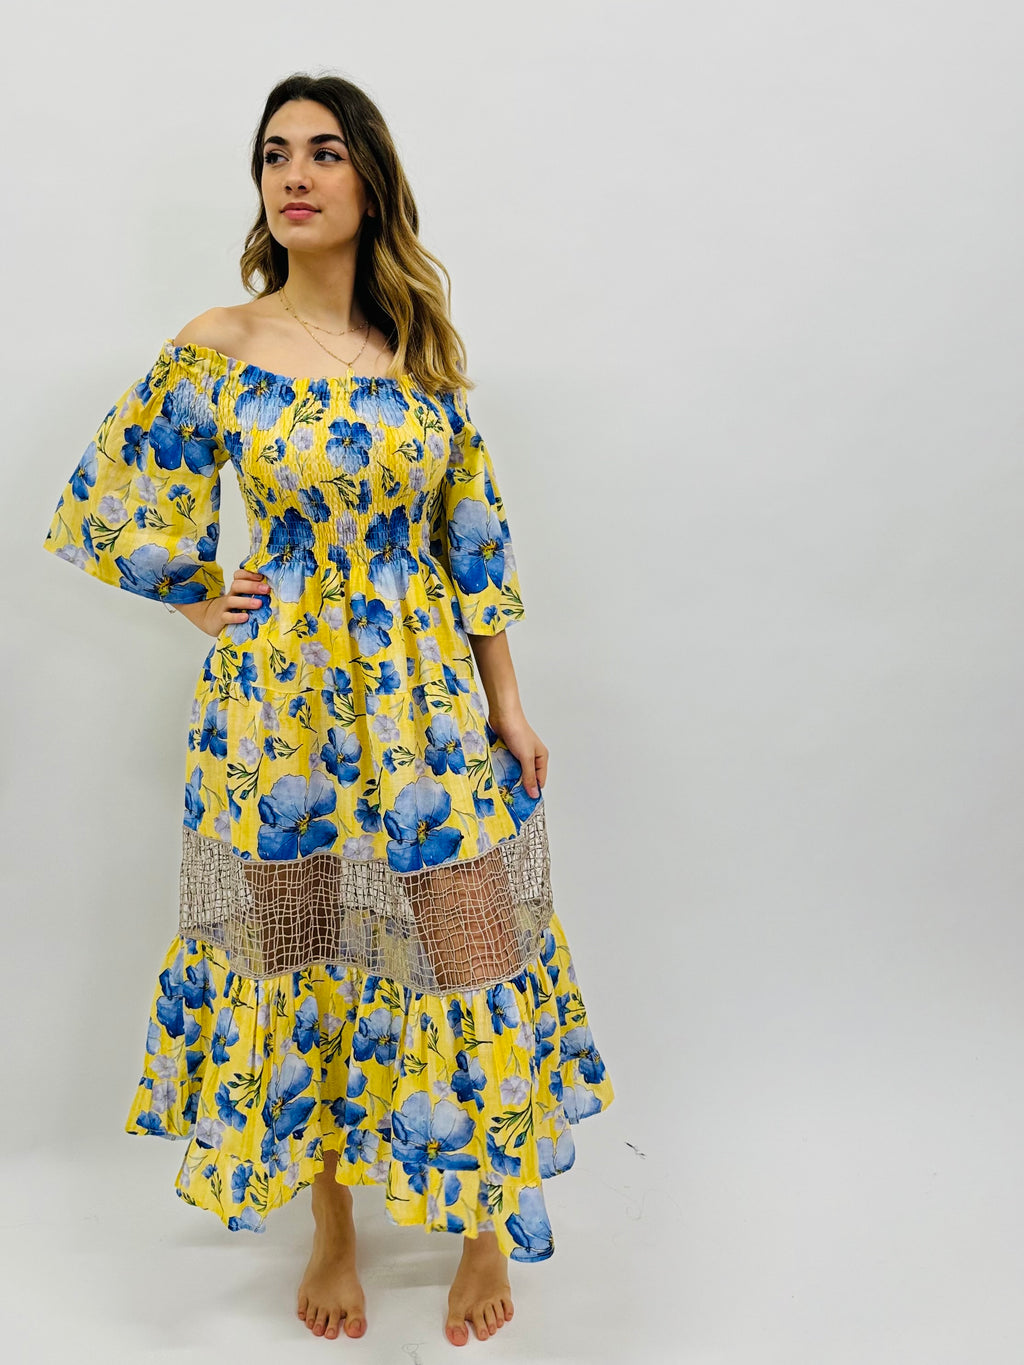 DRESS ELENA IN 100% PRINTED LINEN AND LACE